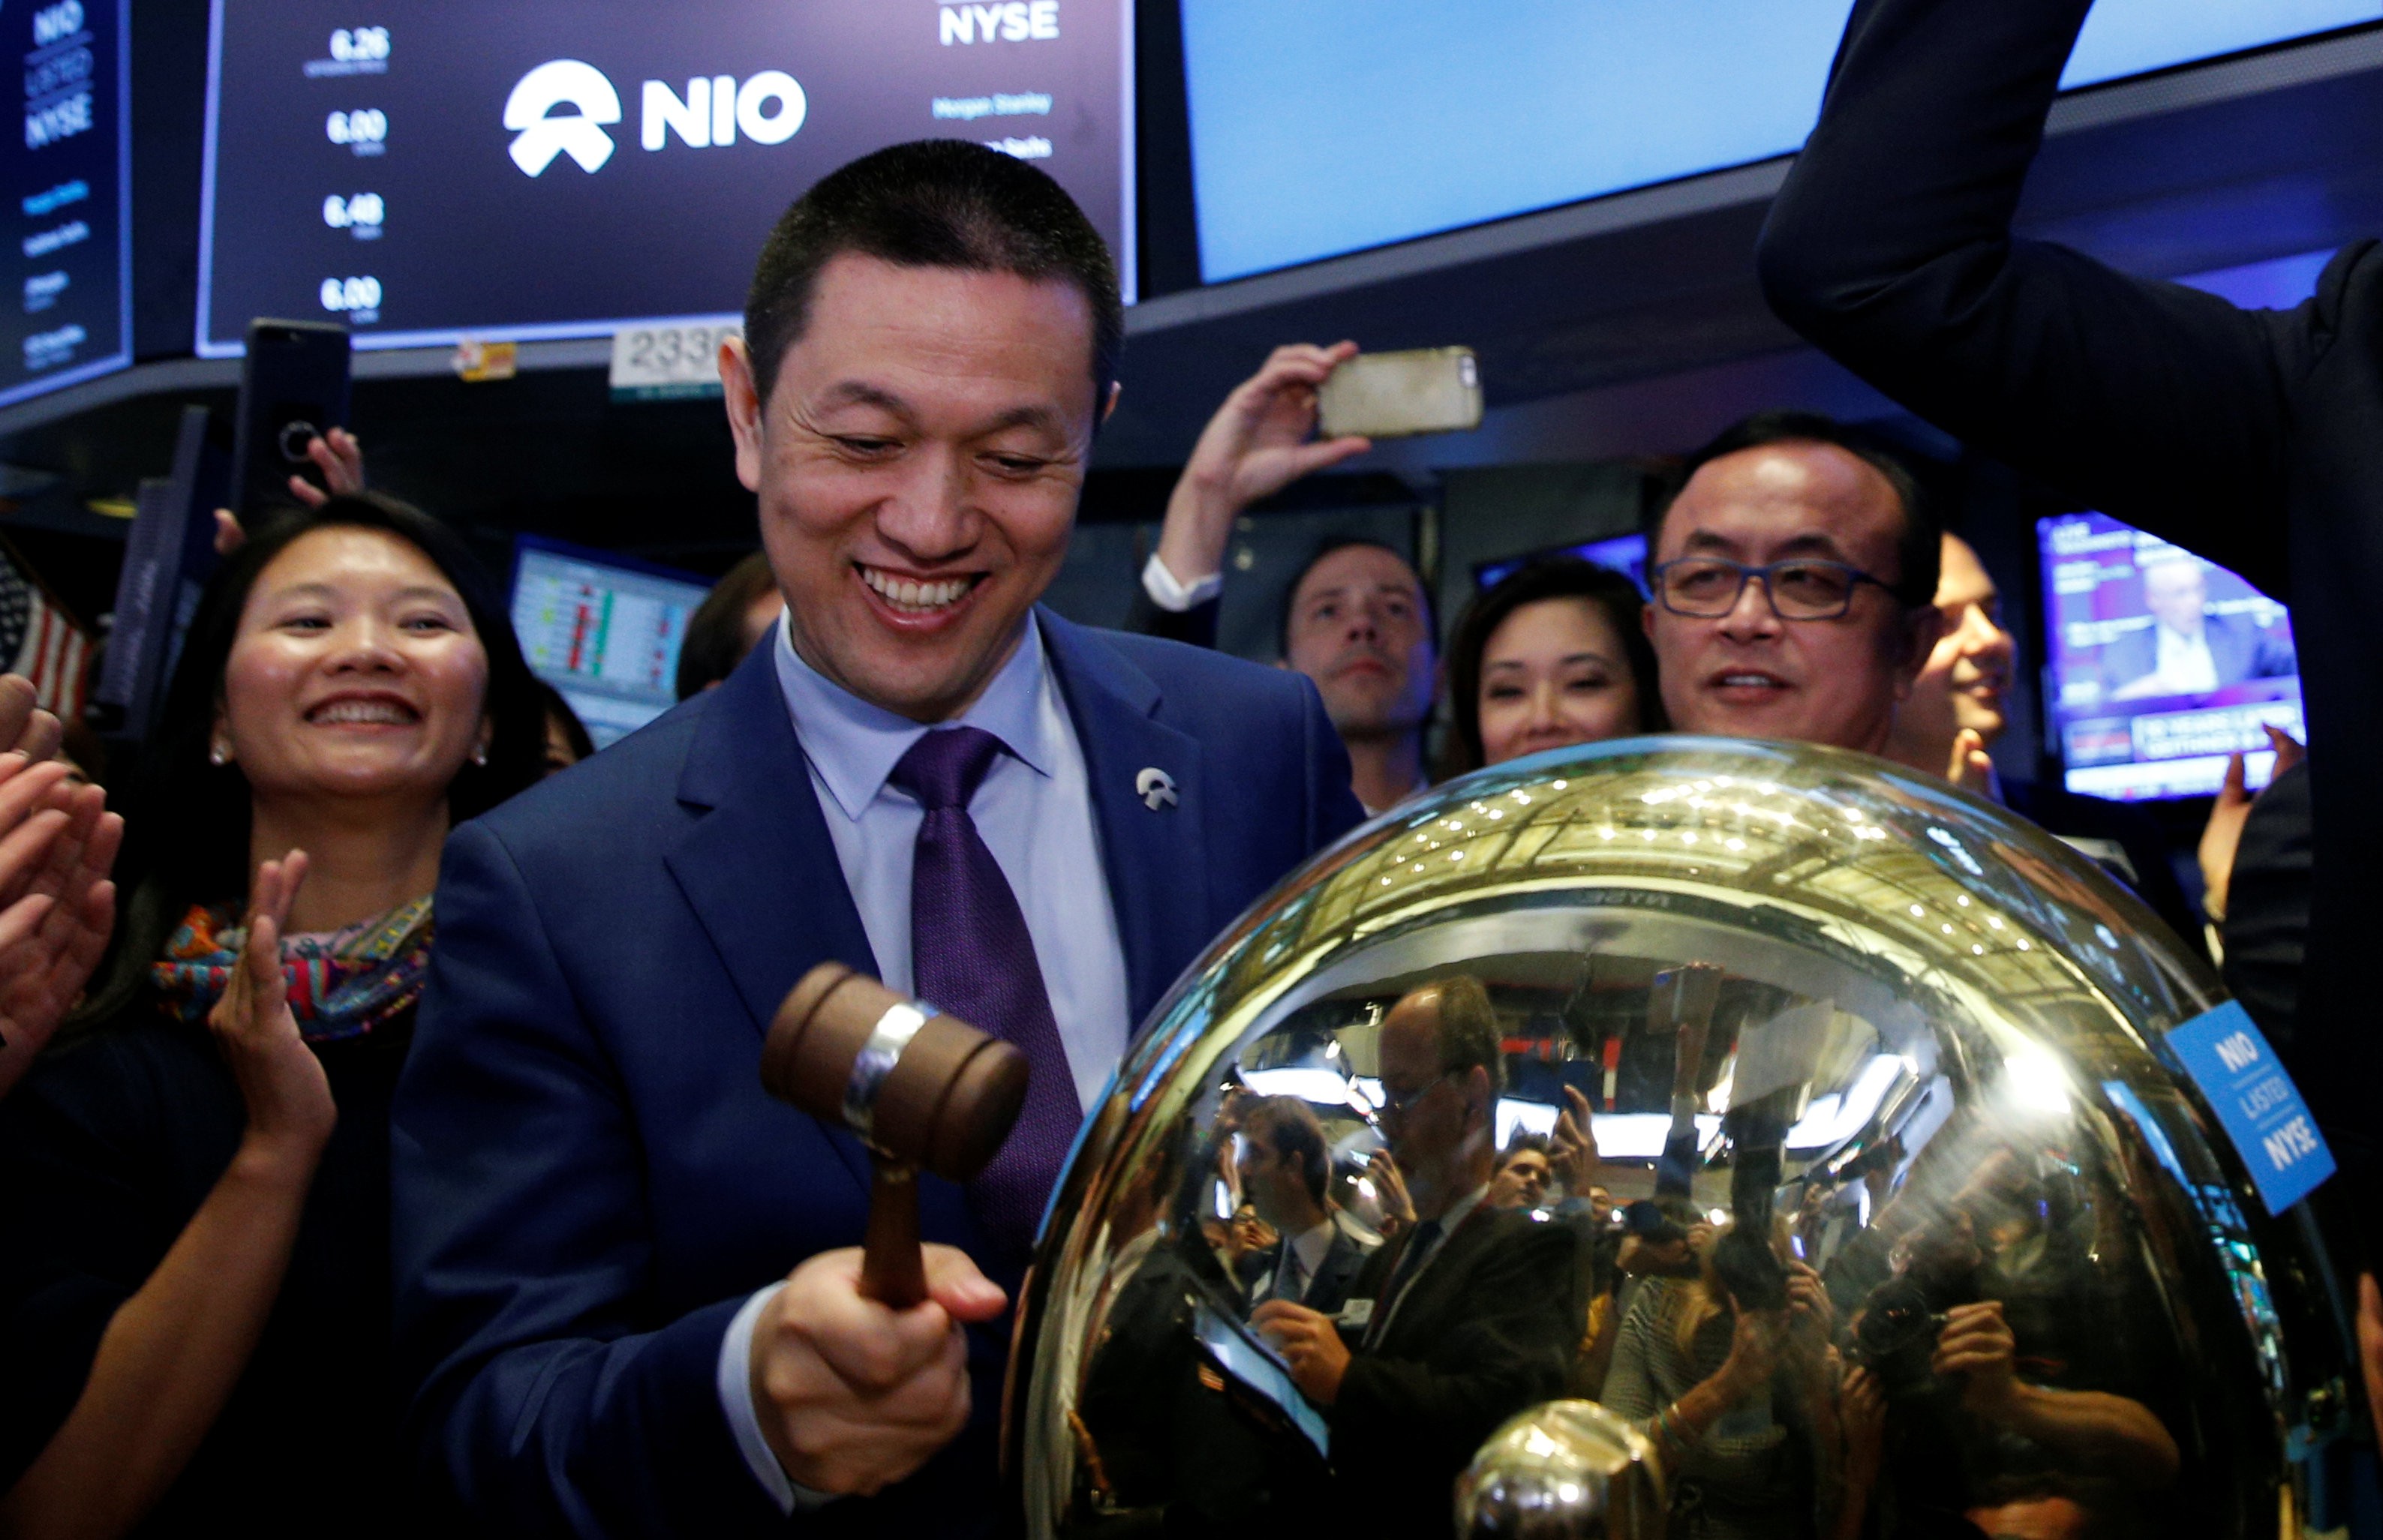 William Li Bin, CEO of Chinese electric vehicle start-up NIO, rings the ceremonial bell for trading to begin on the New York Stock Exchange floor on September 12, 2018. Photo: Reuters